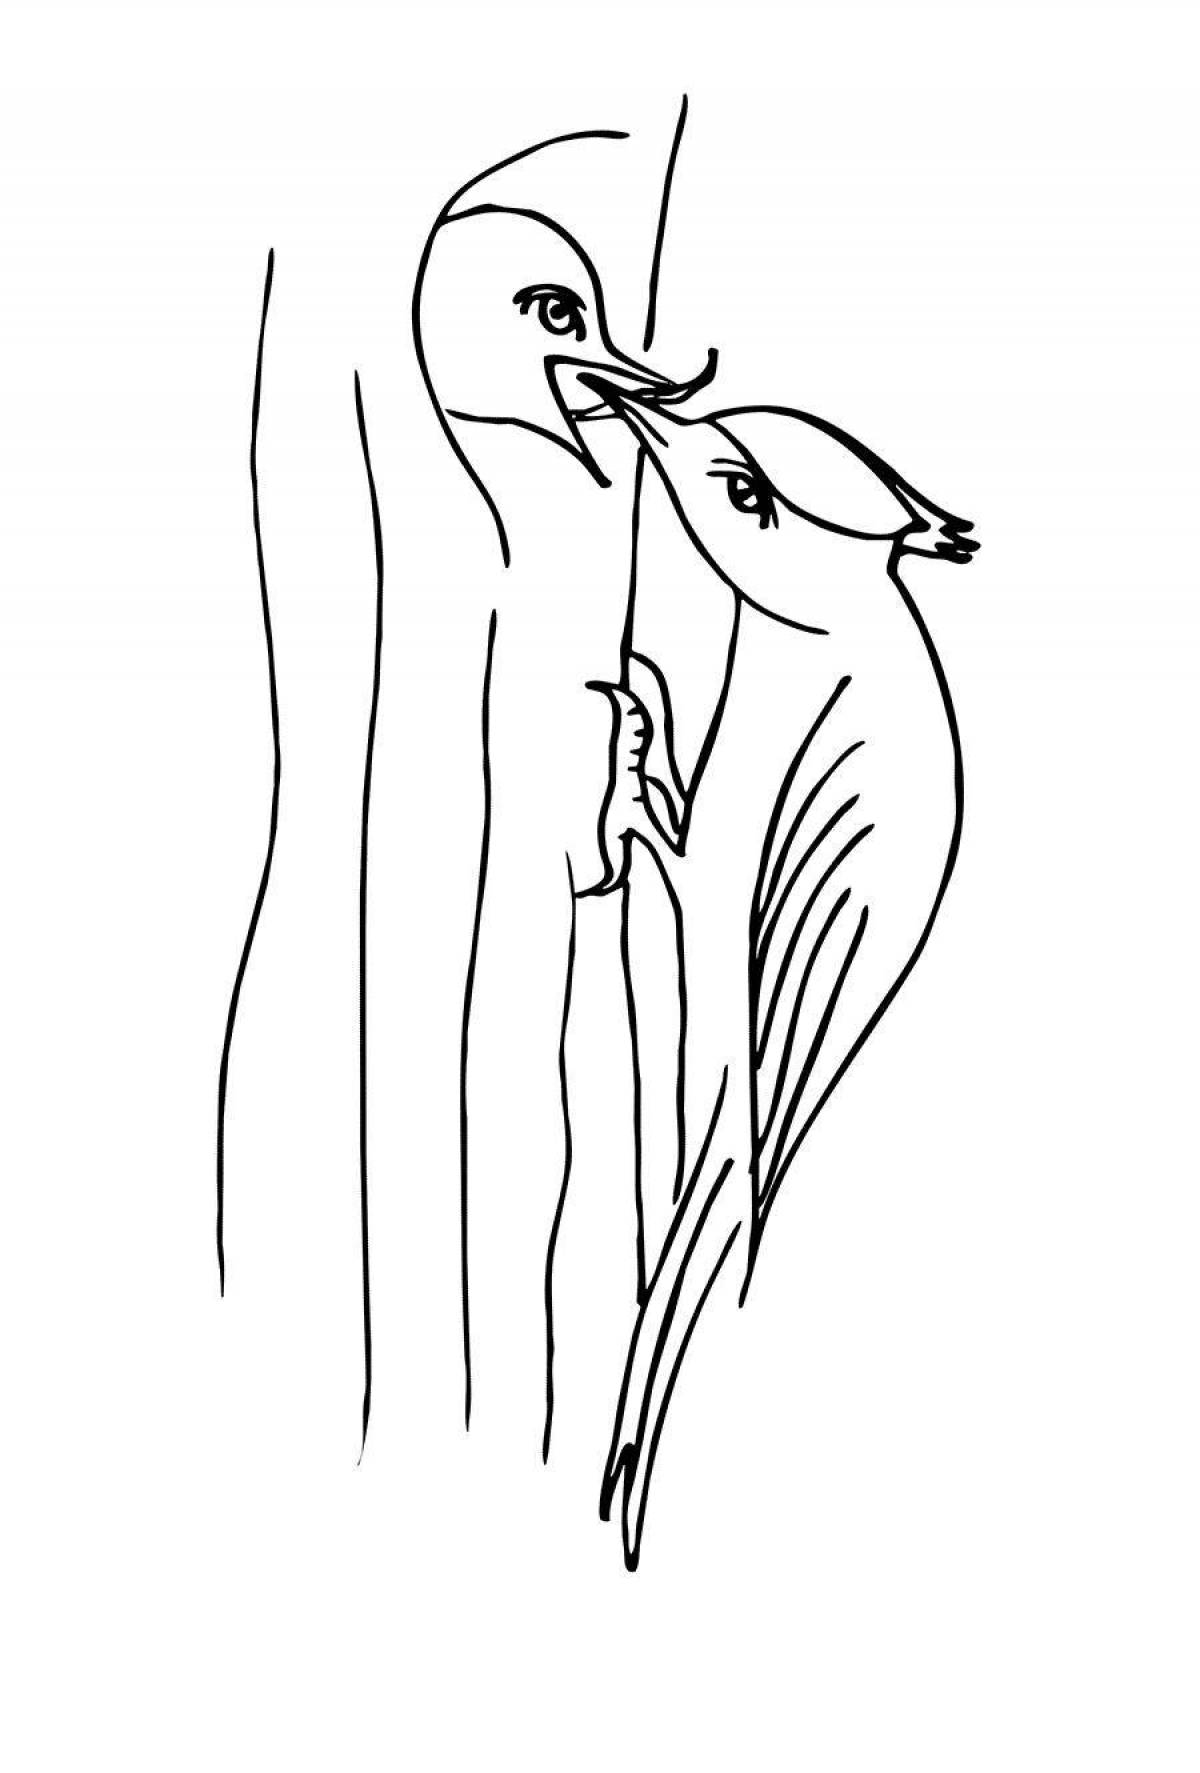 Adorable woodpecker figurine coloring page